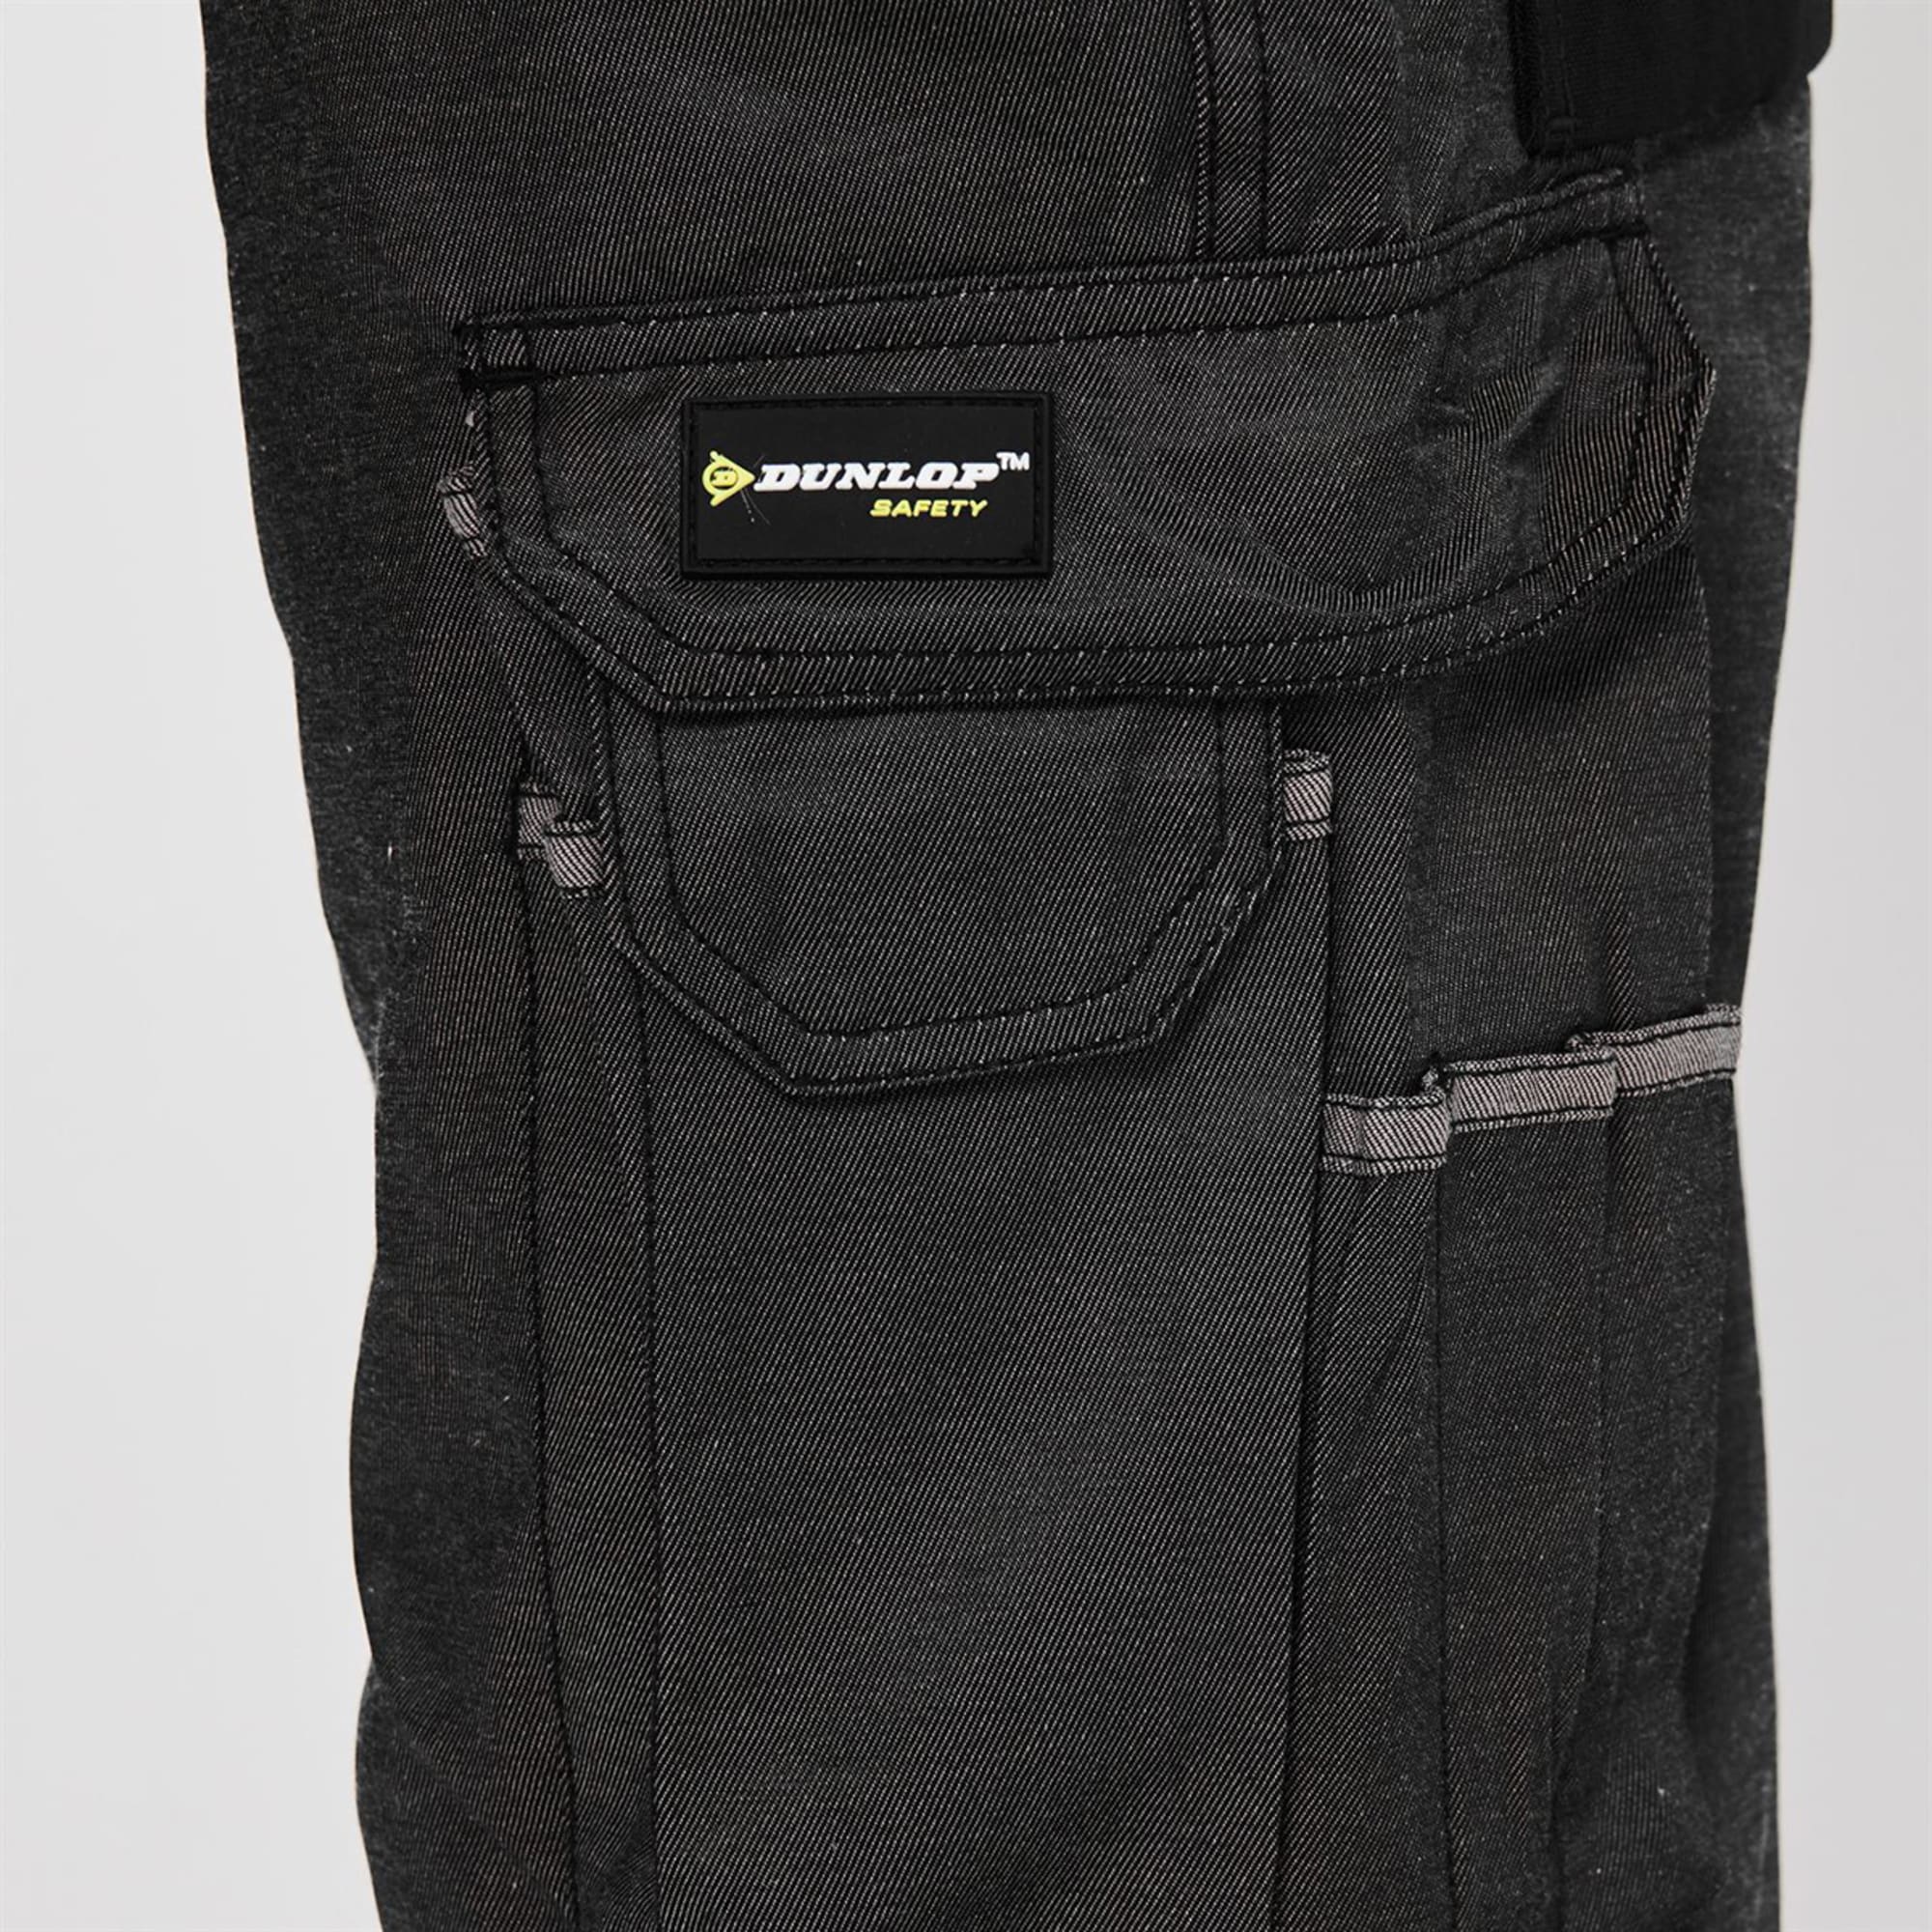 dunlop safety trousers